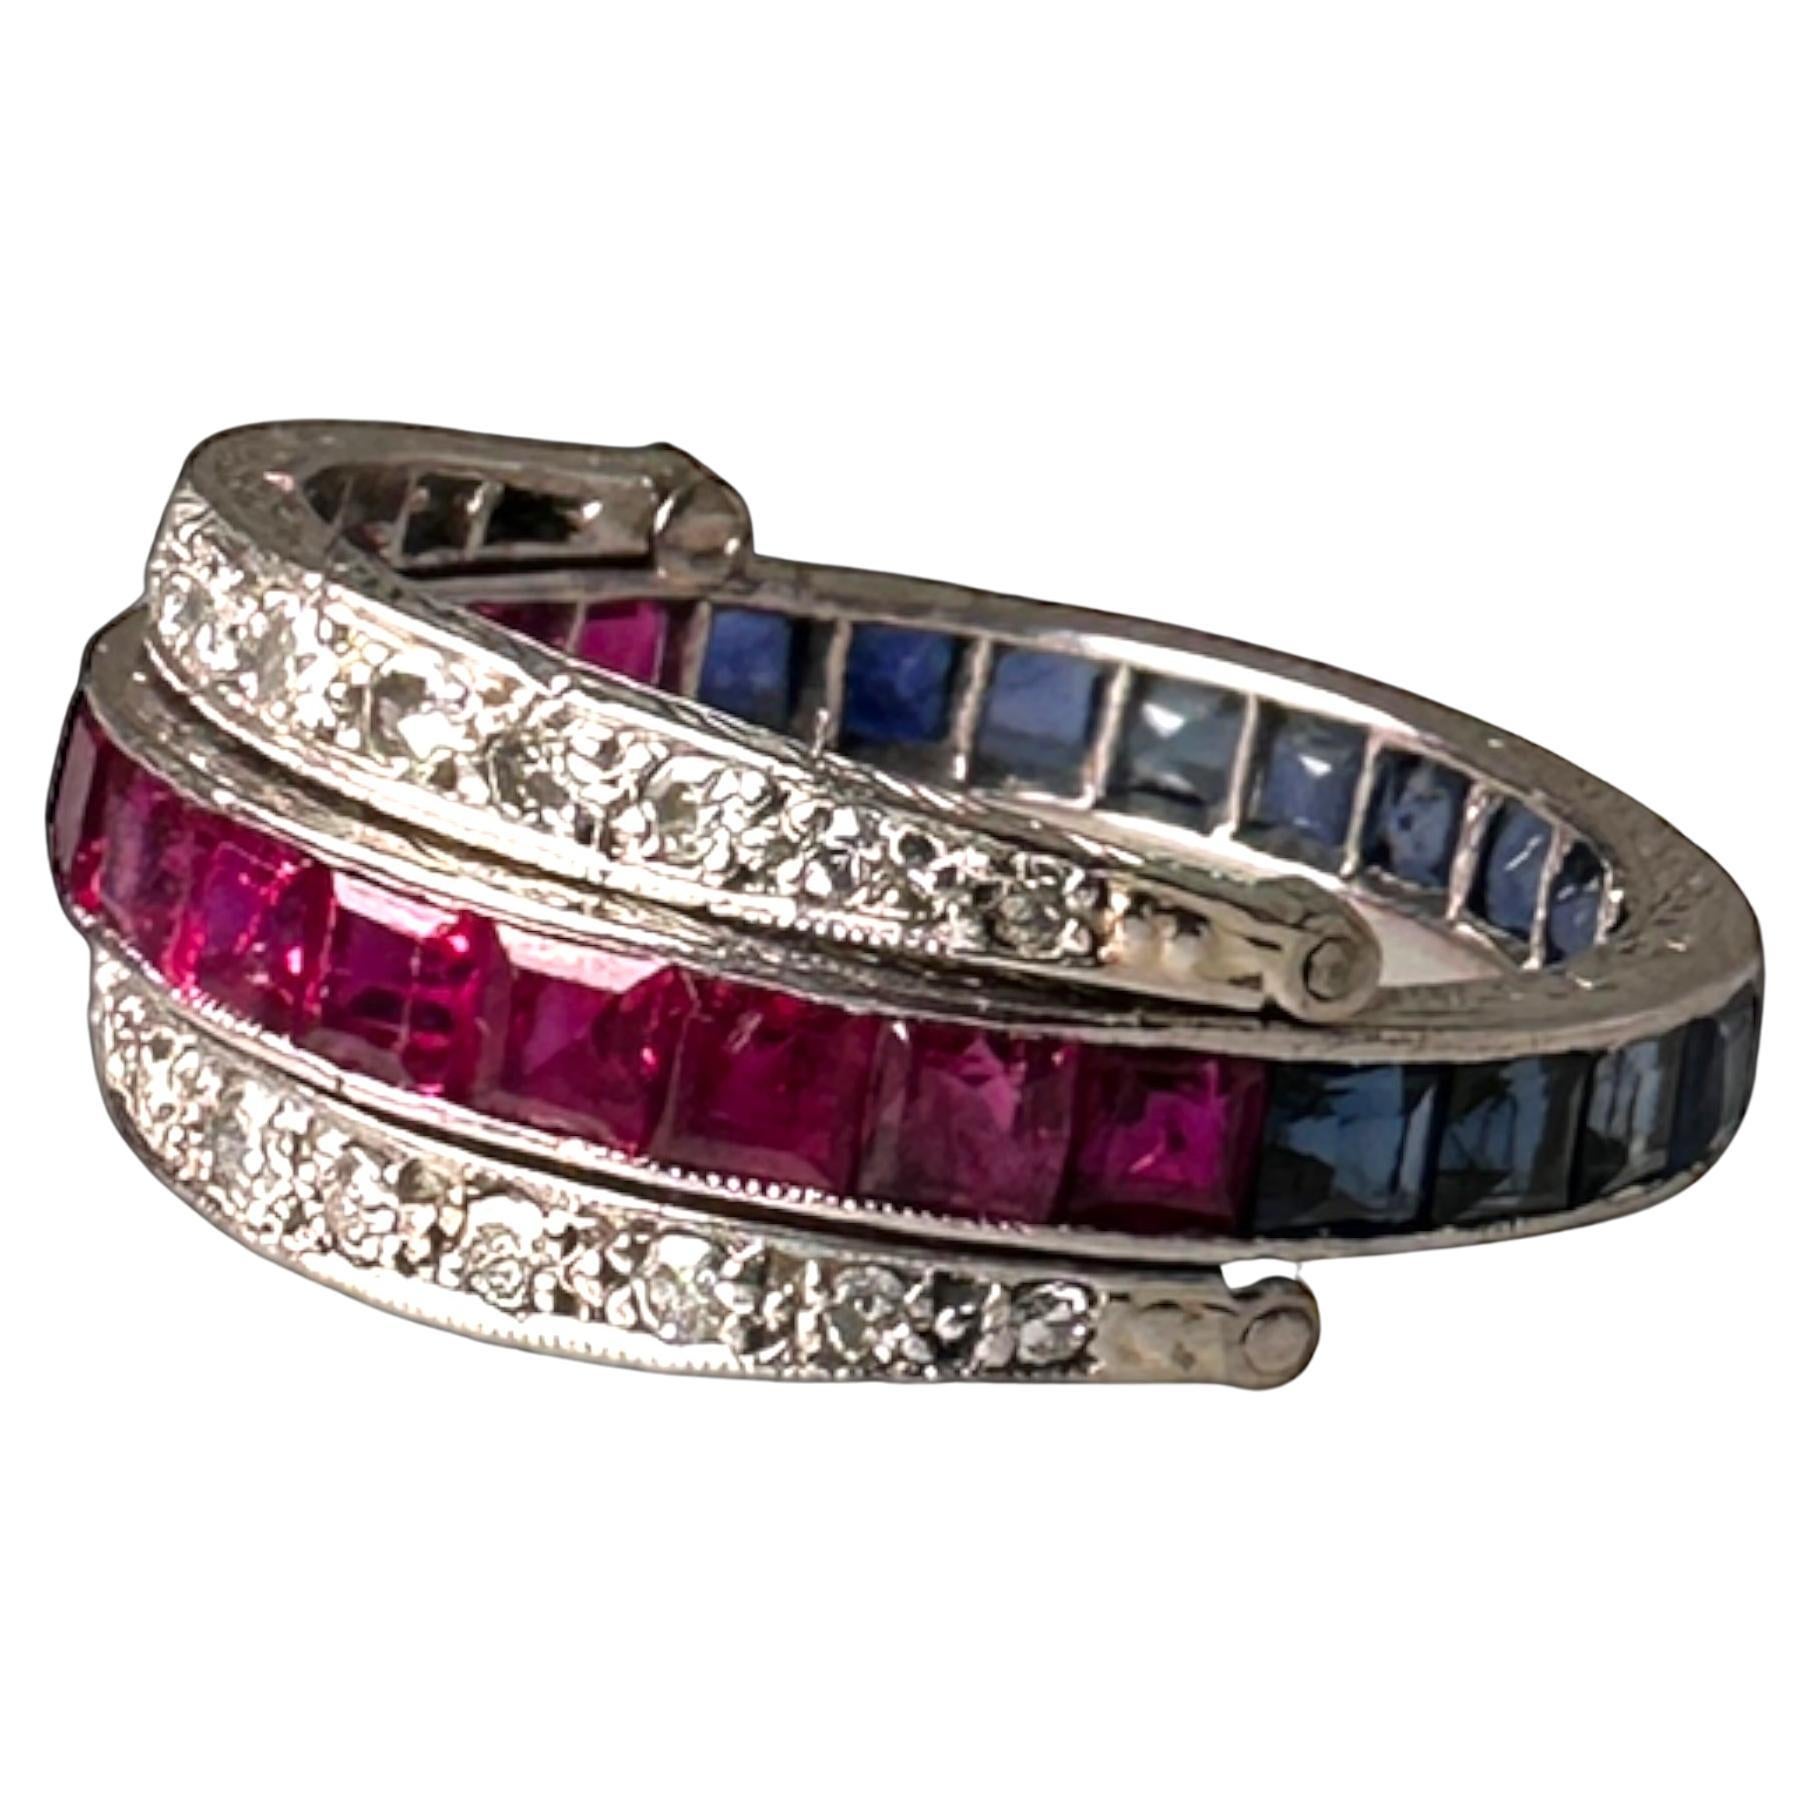 The Diamond, Ruby, and Sapphire Night and Day ring set in Platinum from the 1920s is a breathtaking treasure that will elevate any jewelry collection. This exquisite piece showcases the artistry and elegance of the Roaring Twenties. The dazzling